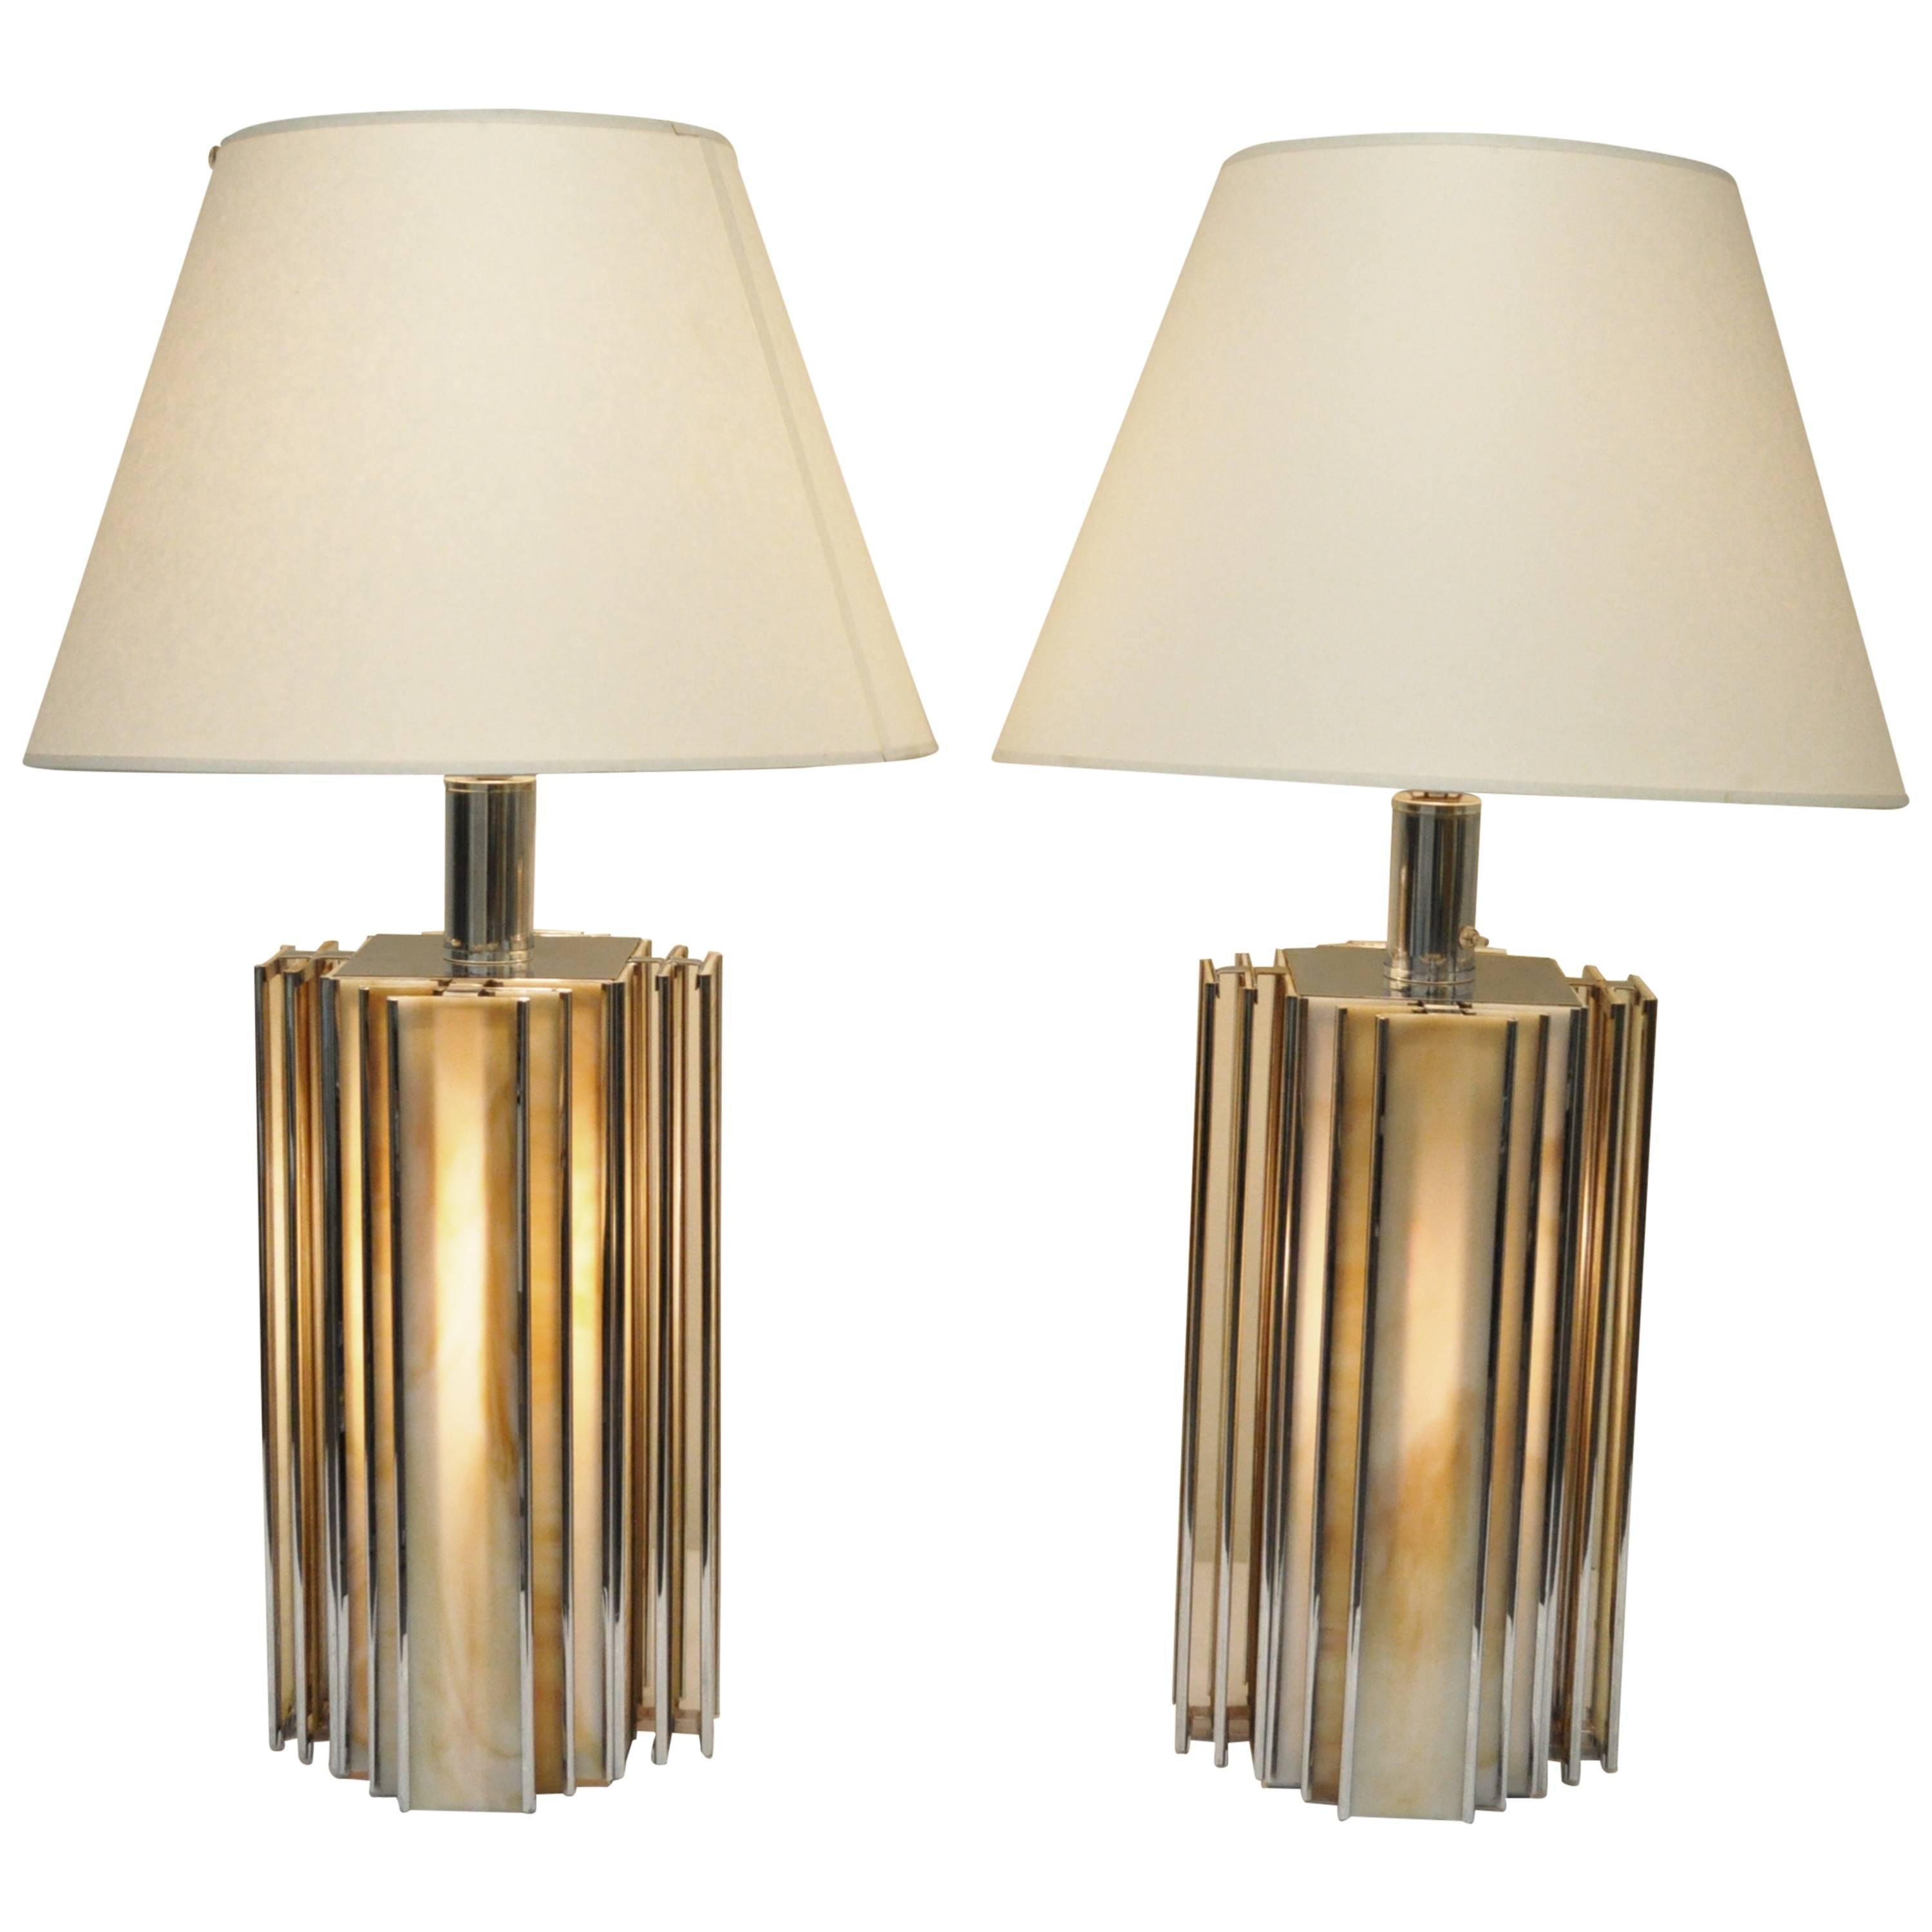 Pair of Mid-Century Modern Chrome and Slag Glass Table Lamps, Art Deco Style